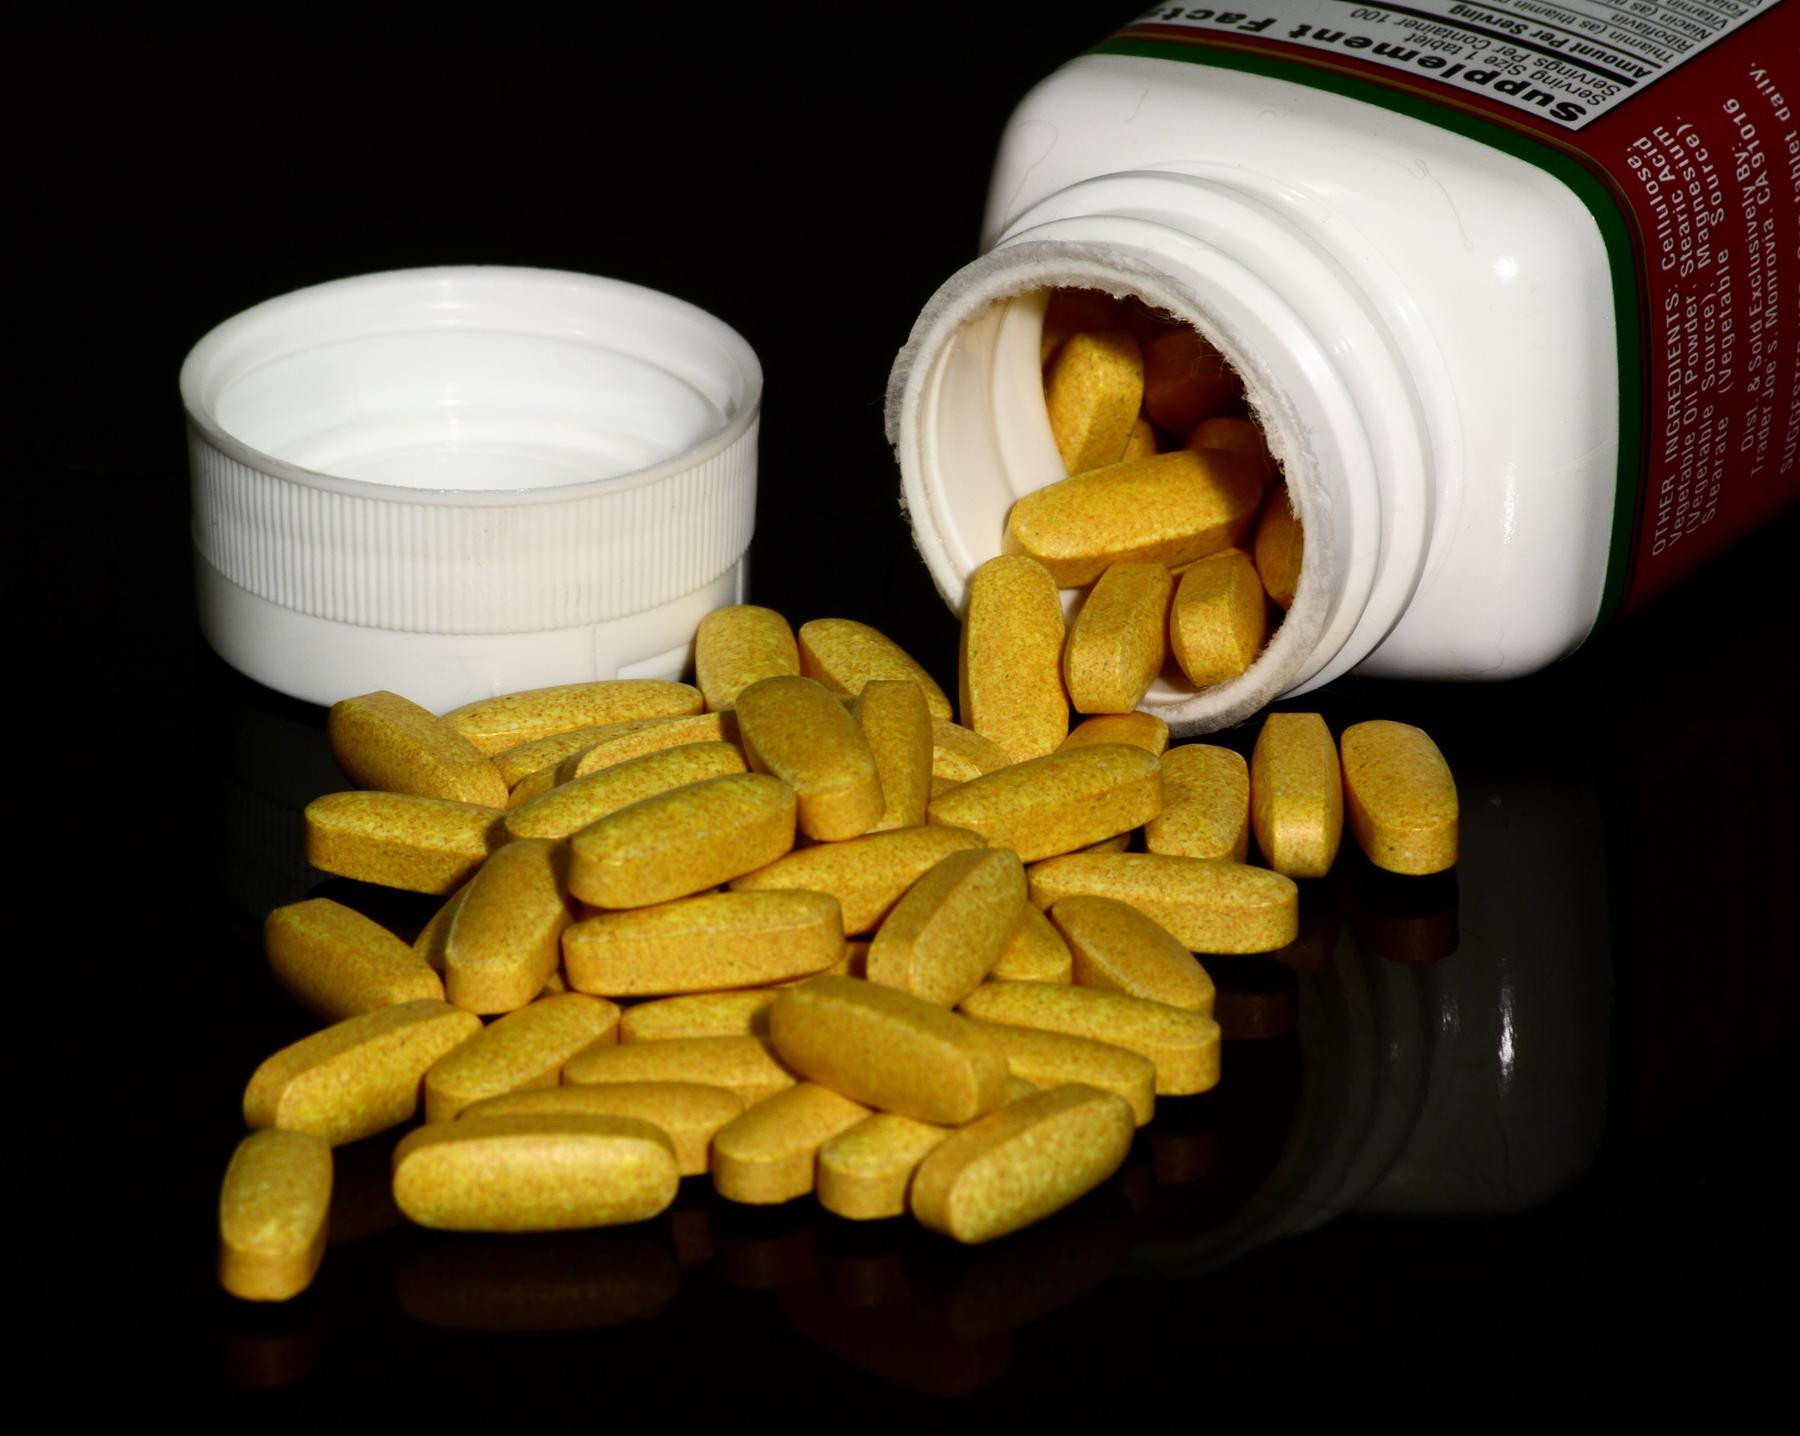 a bottle of pills with a bottle of pills and a bottle of pills - File:B vitamin supplement tablets.j